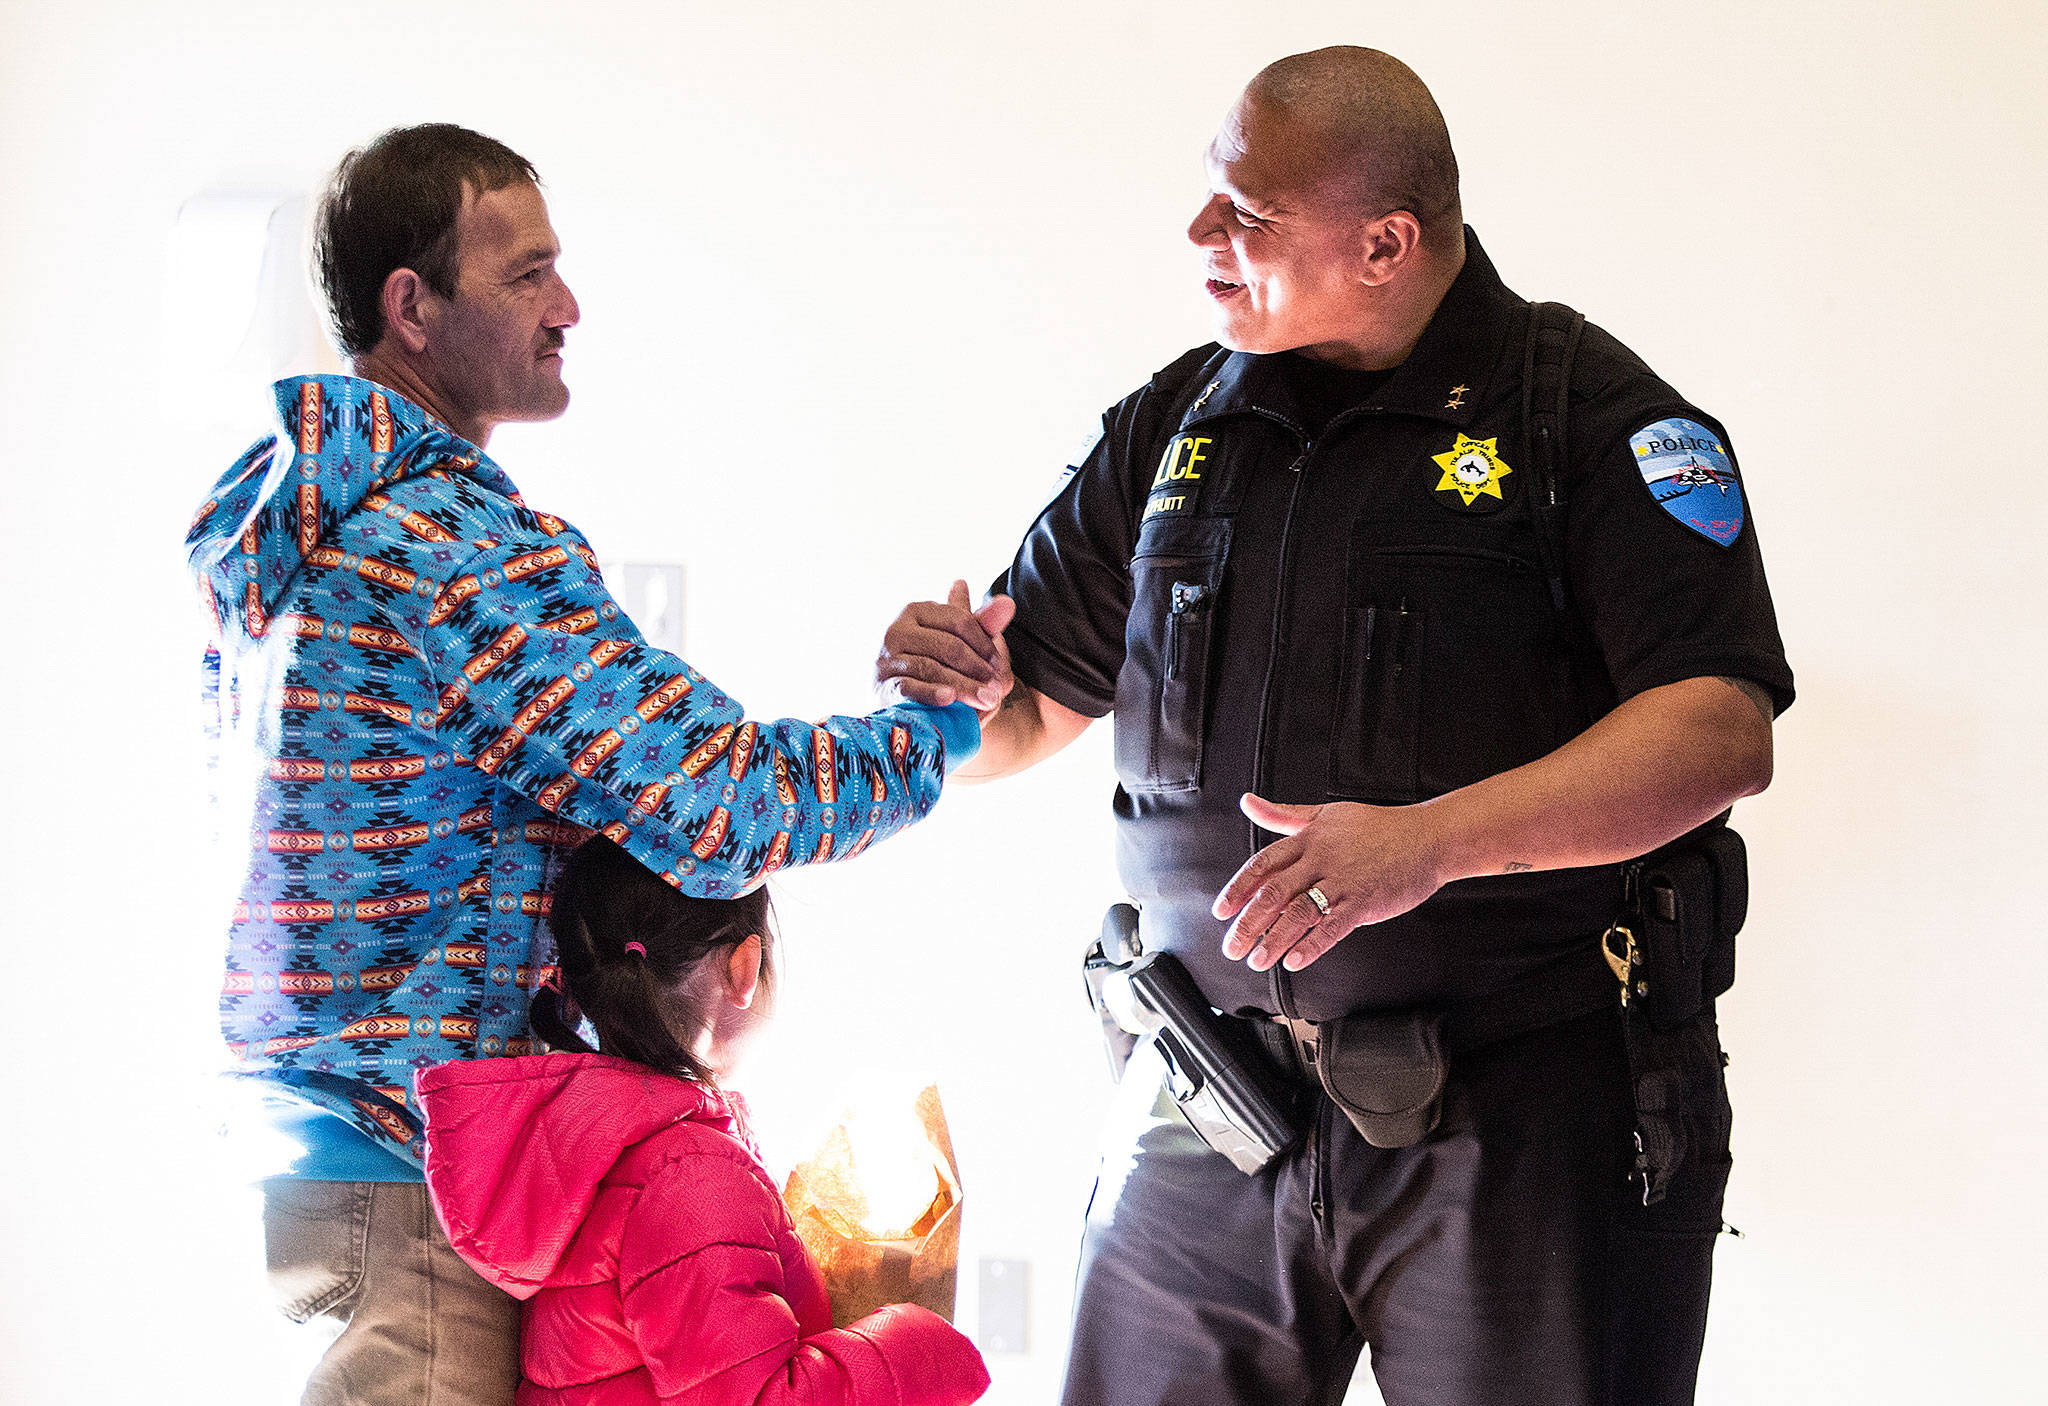 At the Don Hatch Youth Center, Verle Smith shakes hands with Tulalip Tribes Police Department Deputy Chief Sherman Pruitt before Smith is honored, by friends and family, as the first graduate from the Tulalip Healing to Wellness Court on Monday, Dec. 10, 2018 in Tulalip Reservation, Wa. (Andy Bronson / The Herald)